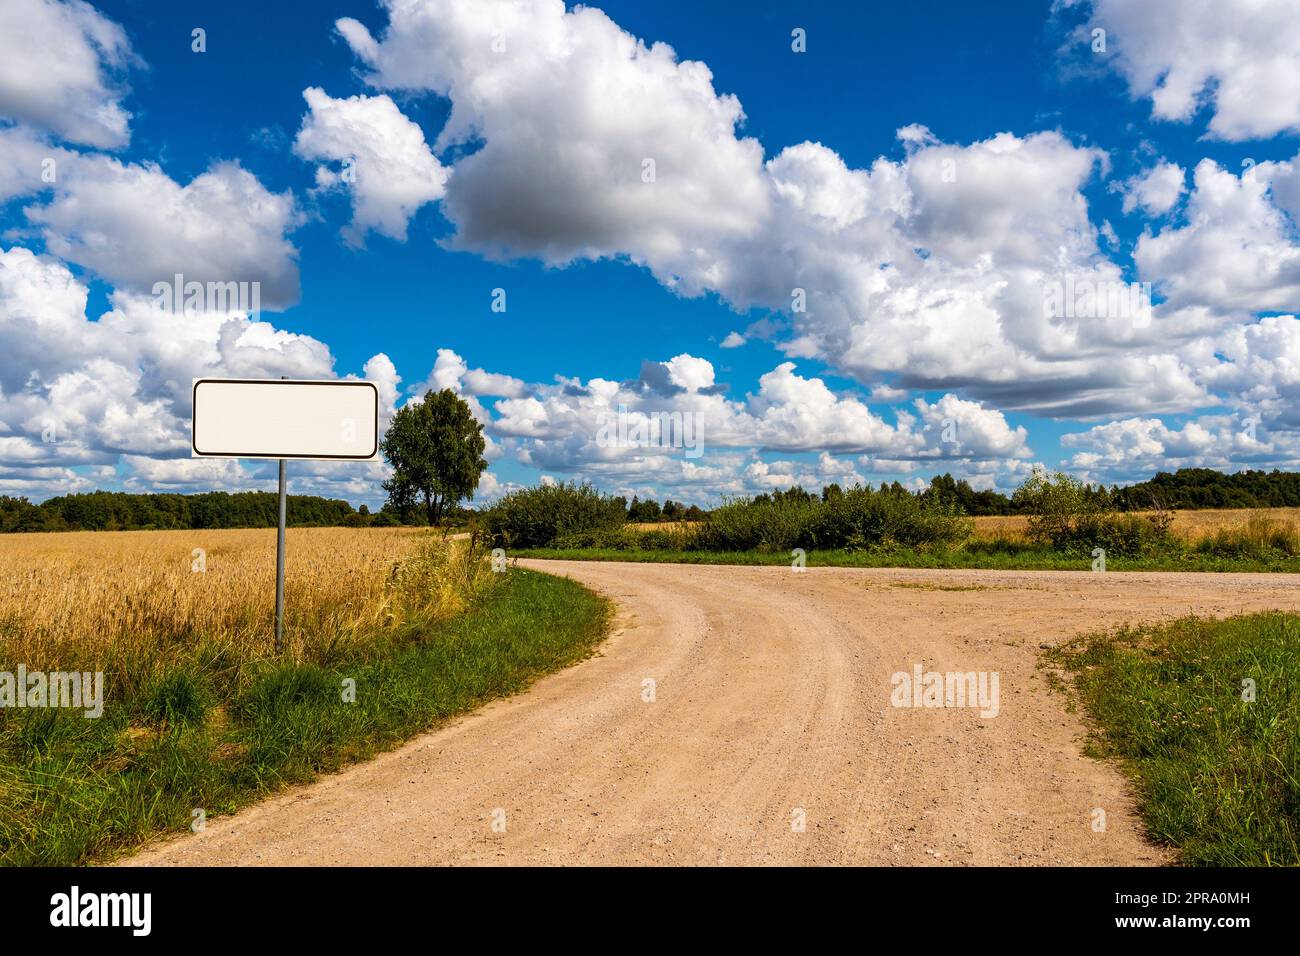 A country road splits in two, making a decision-requiring fork in the road Stock Photo